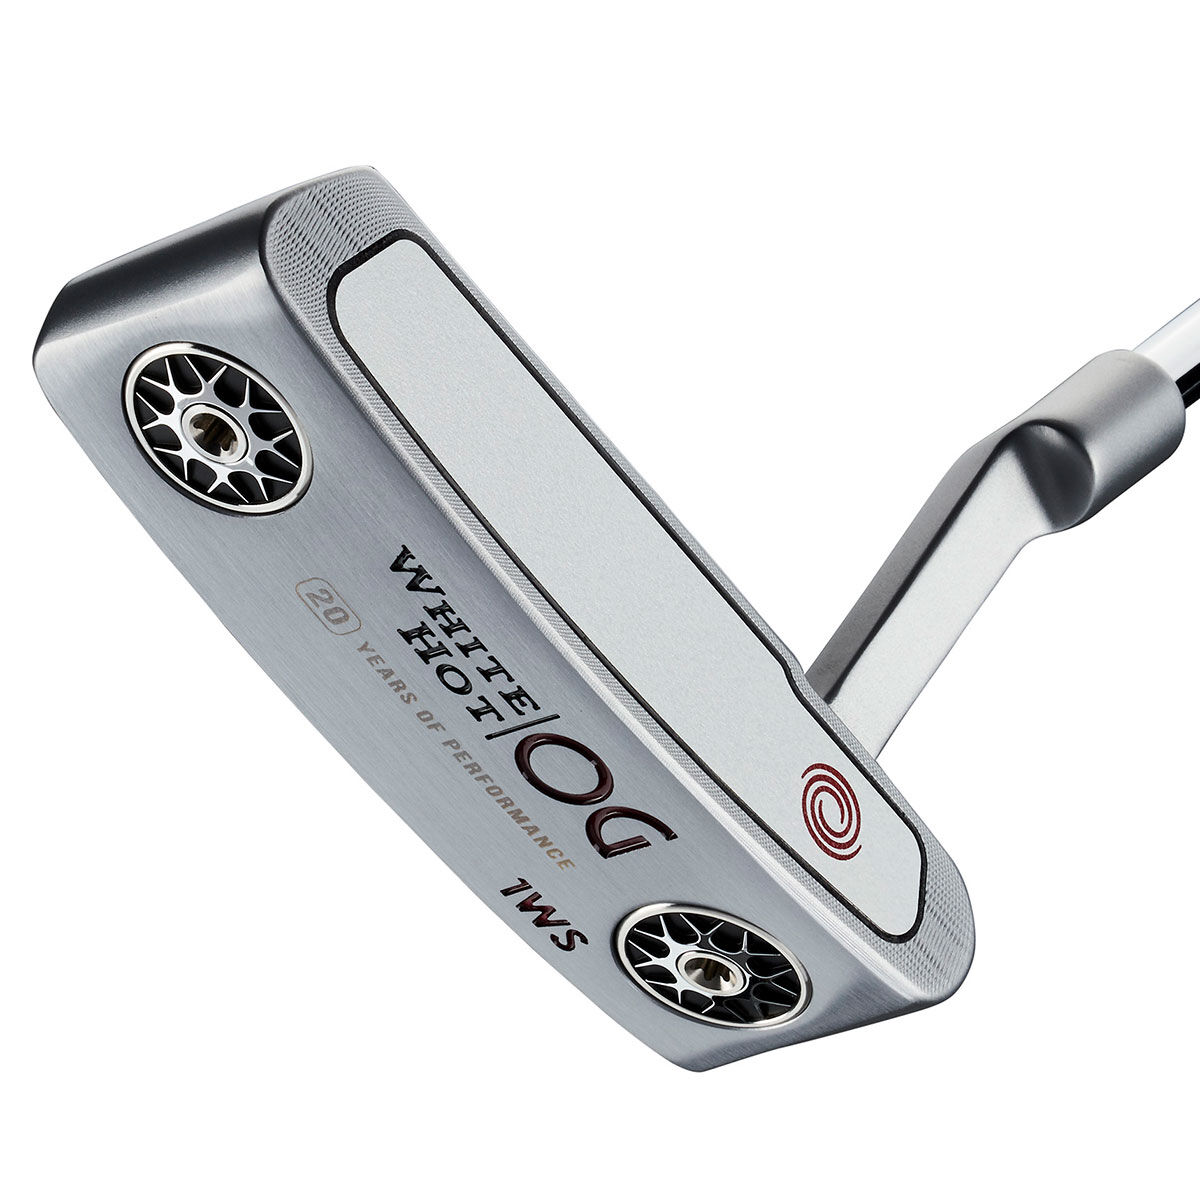 Golf Putter Odyssey White Hot OG 1 Wide Sole Stroke Lab OS, homme, Main Droite, 34 pouces | Online G